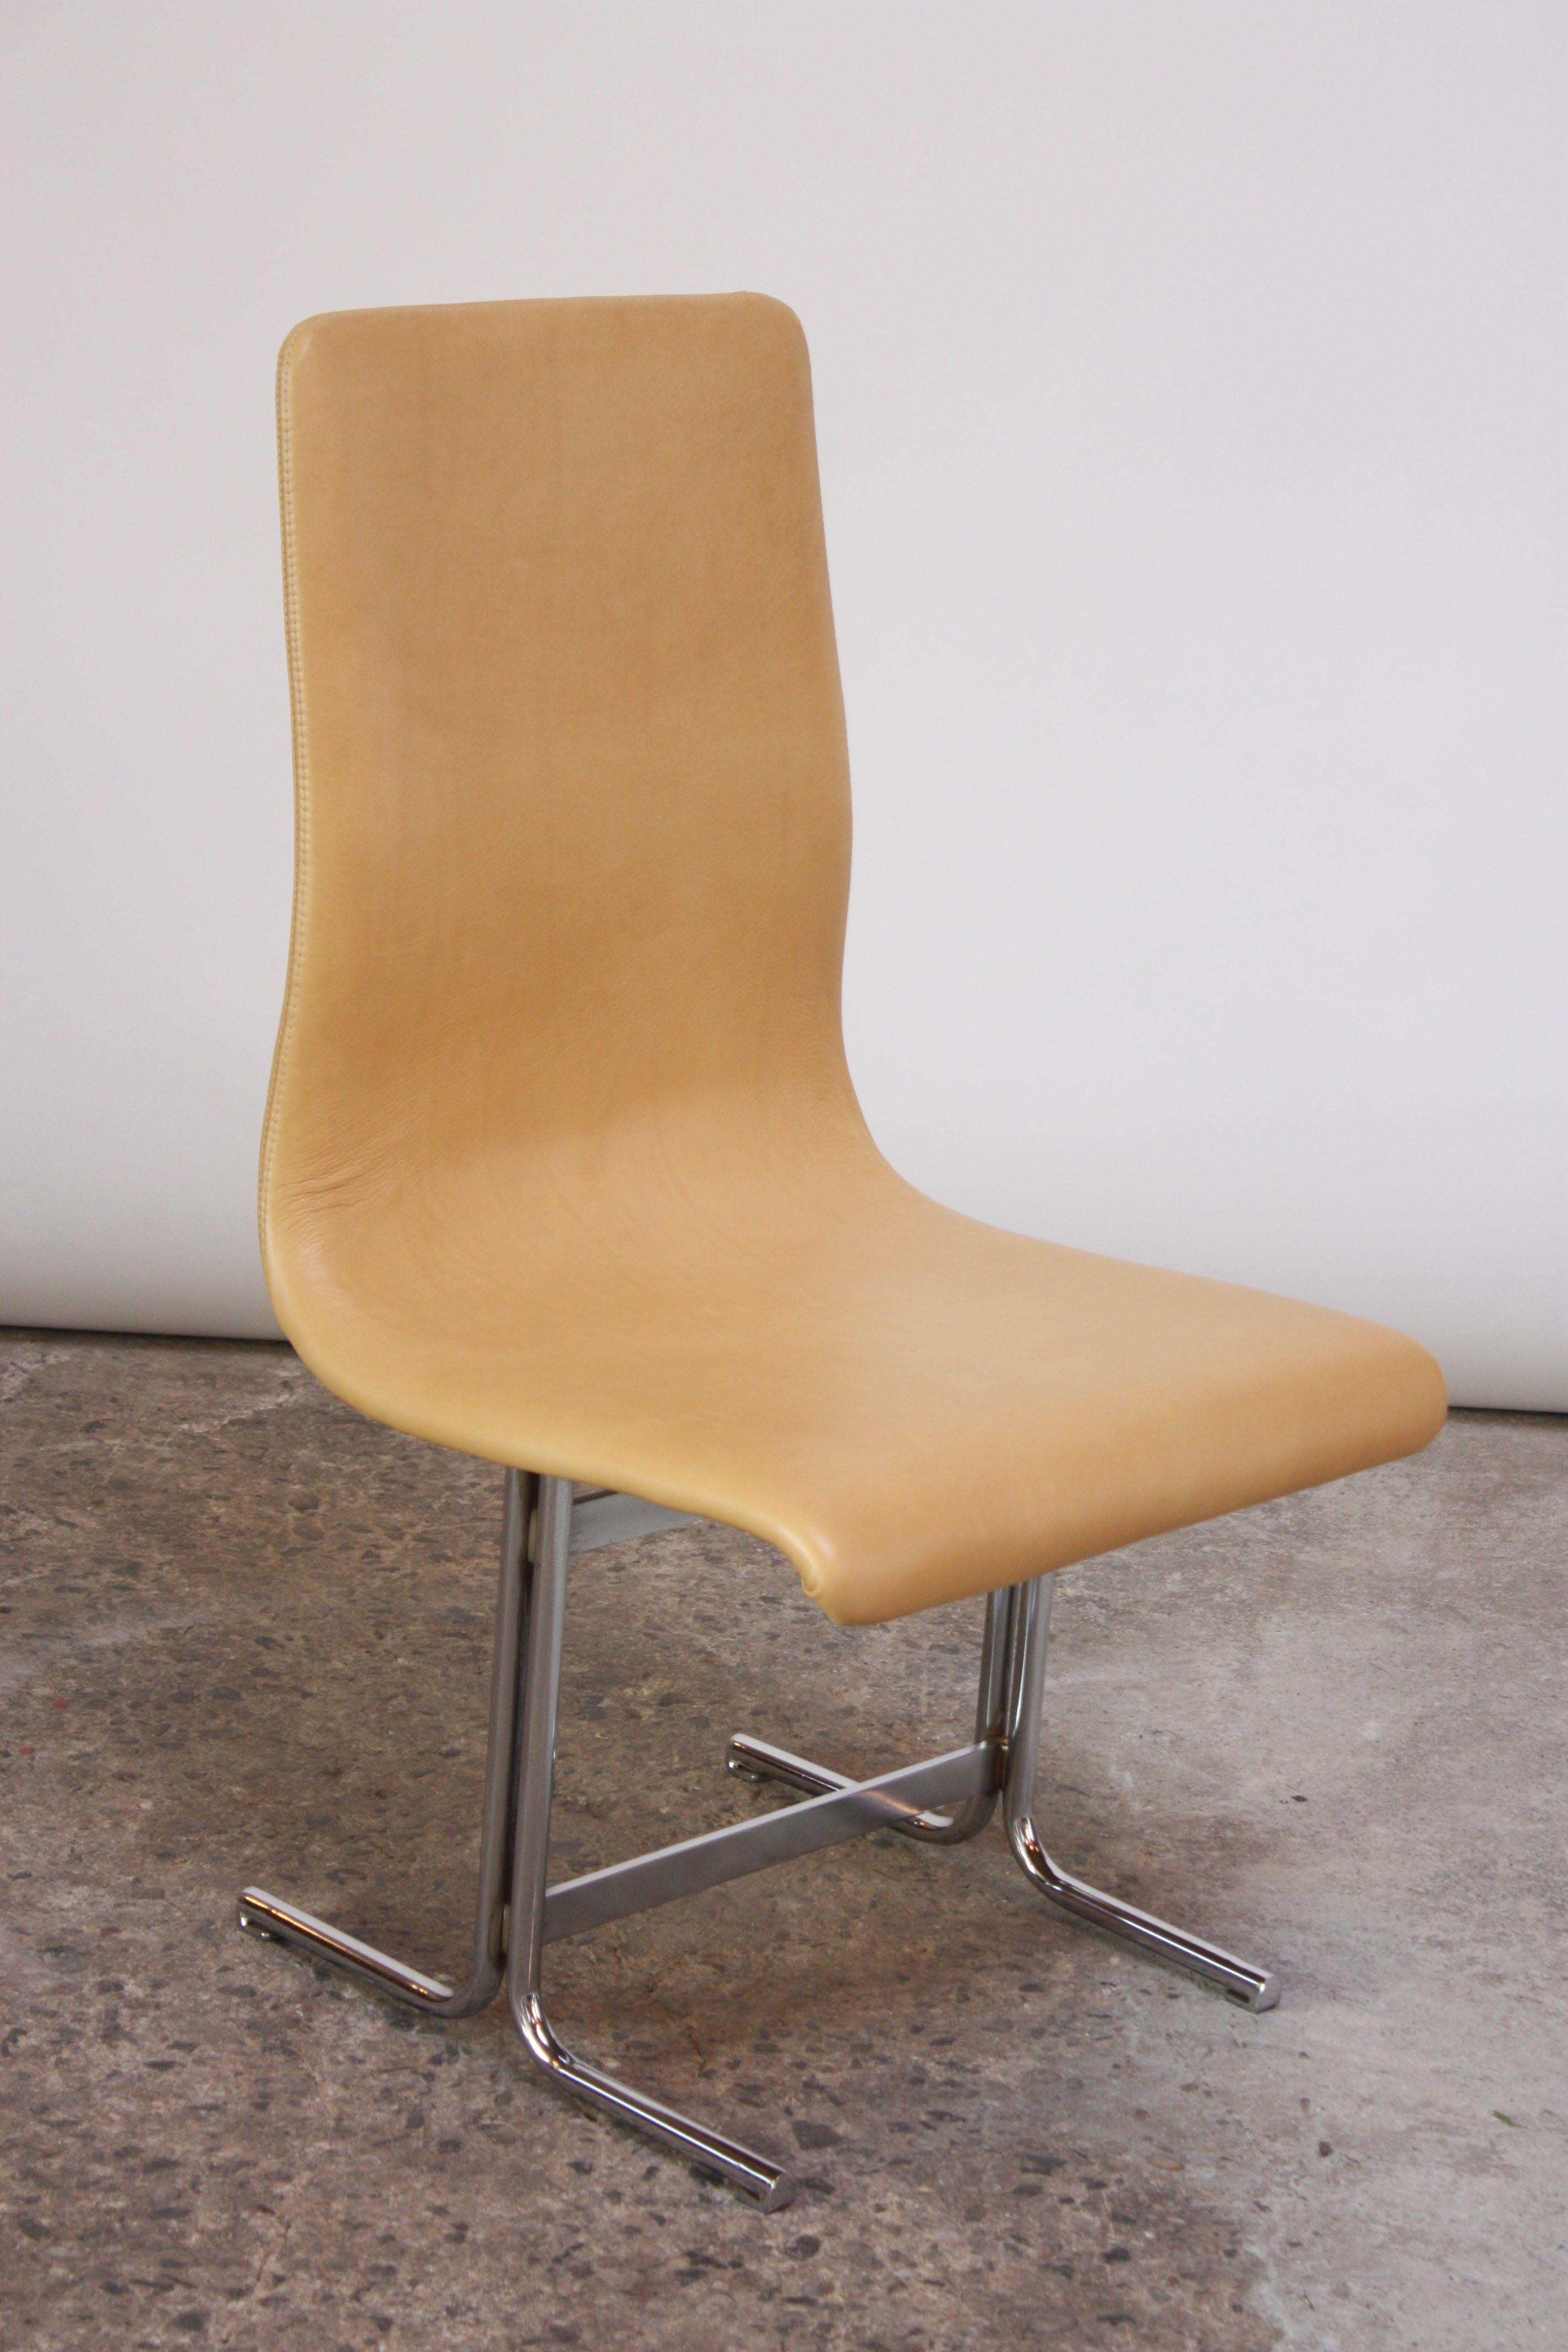 Mid-Century Modern Swedish Modern Leather and Chrome Accent Chair by Vemo Industri AB For Sale